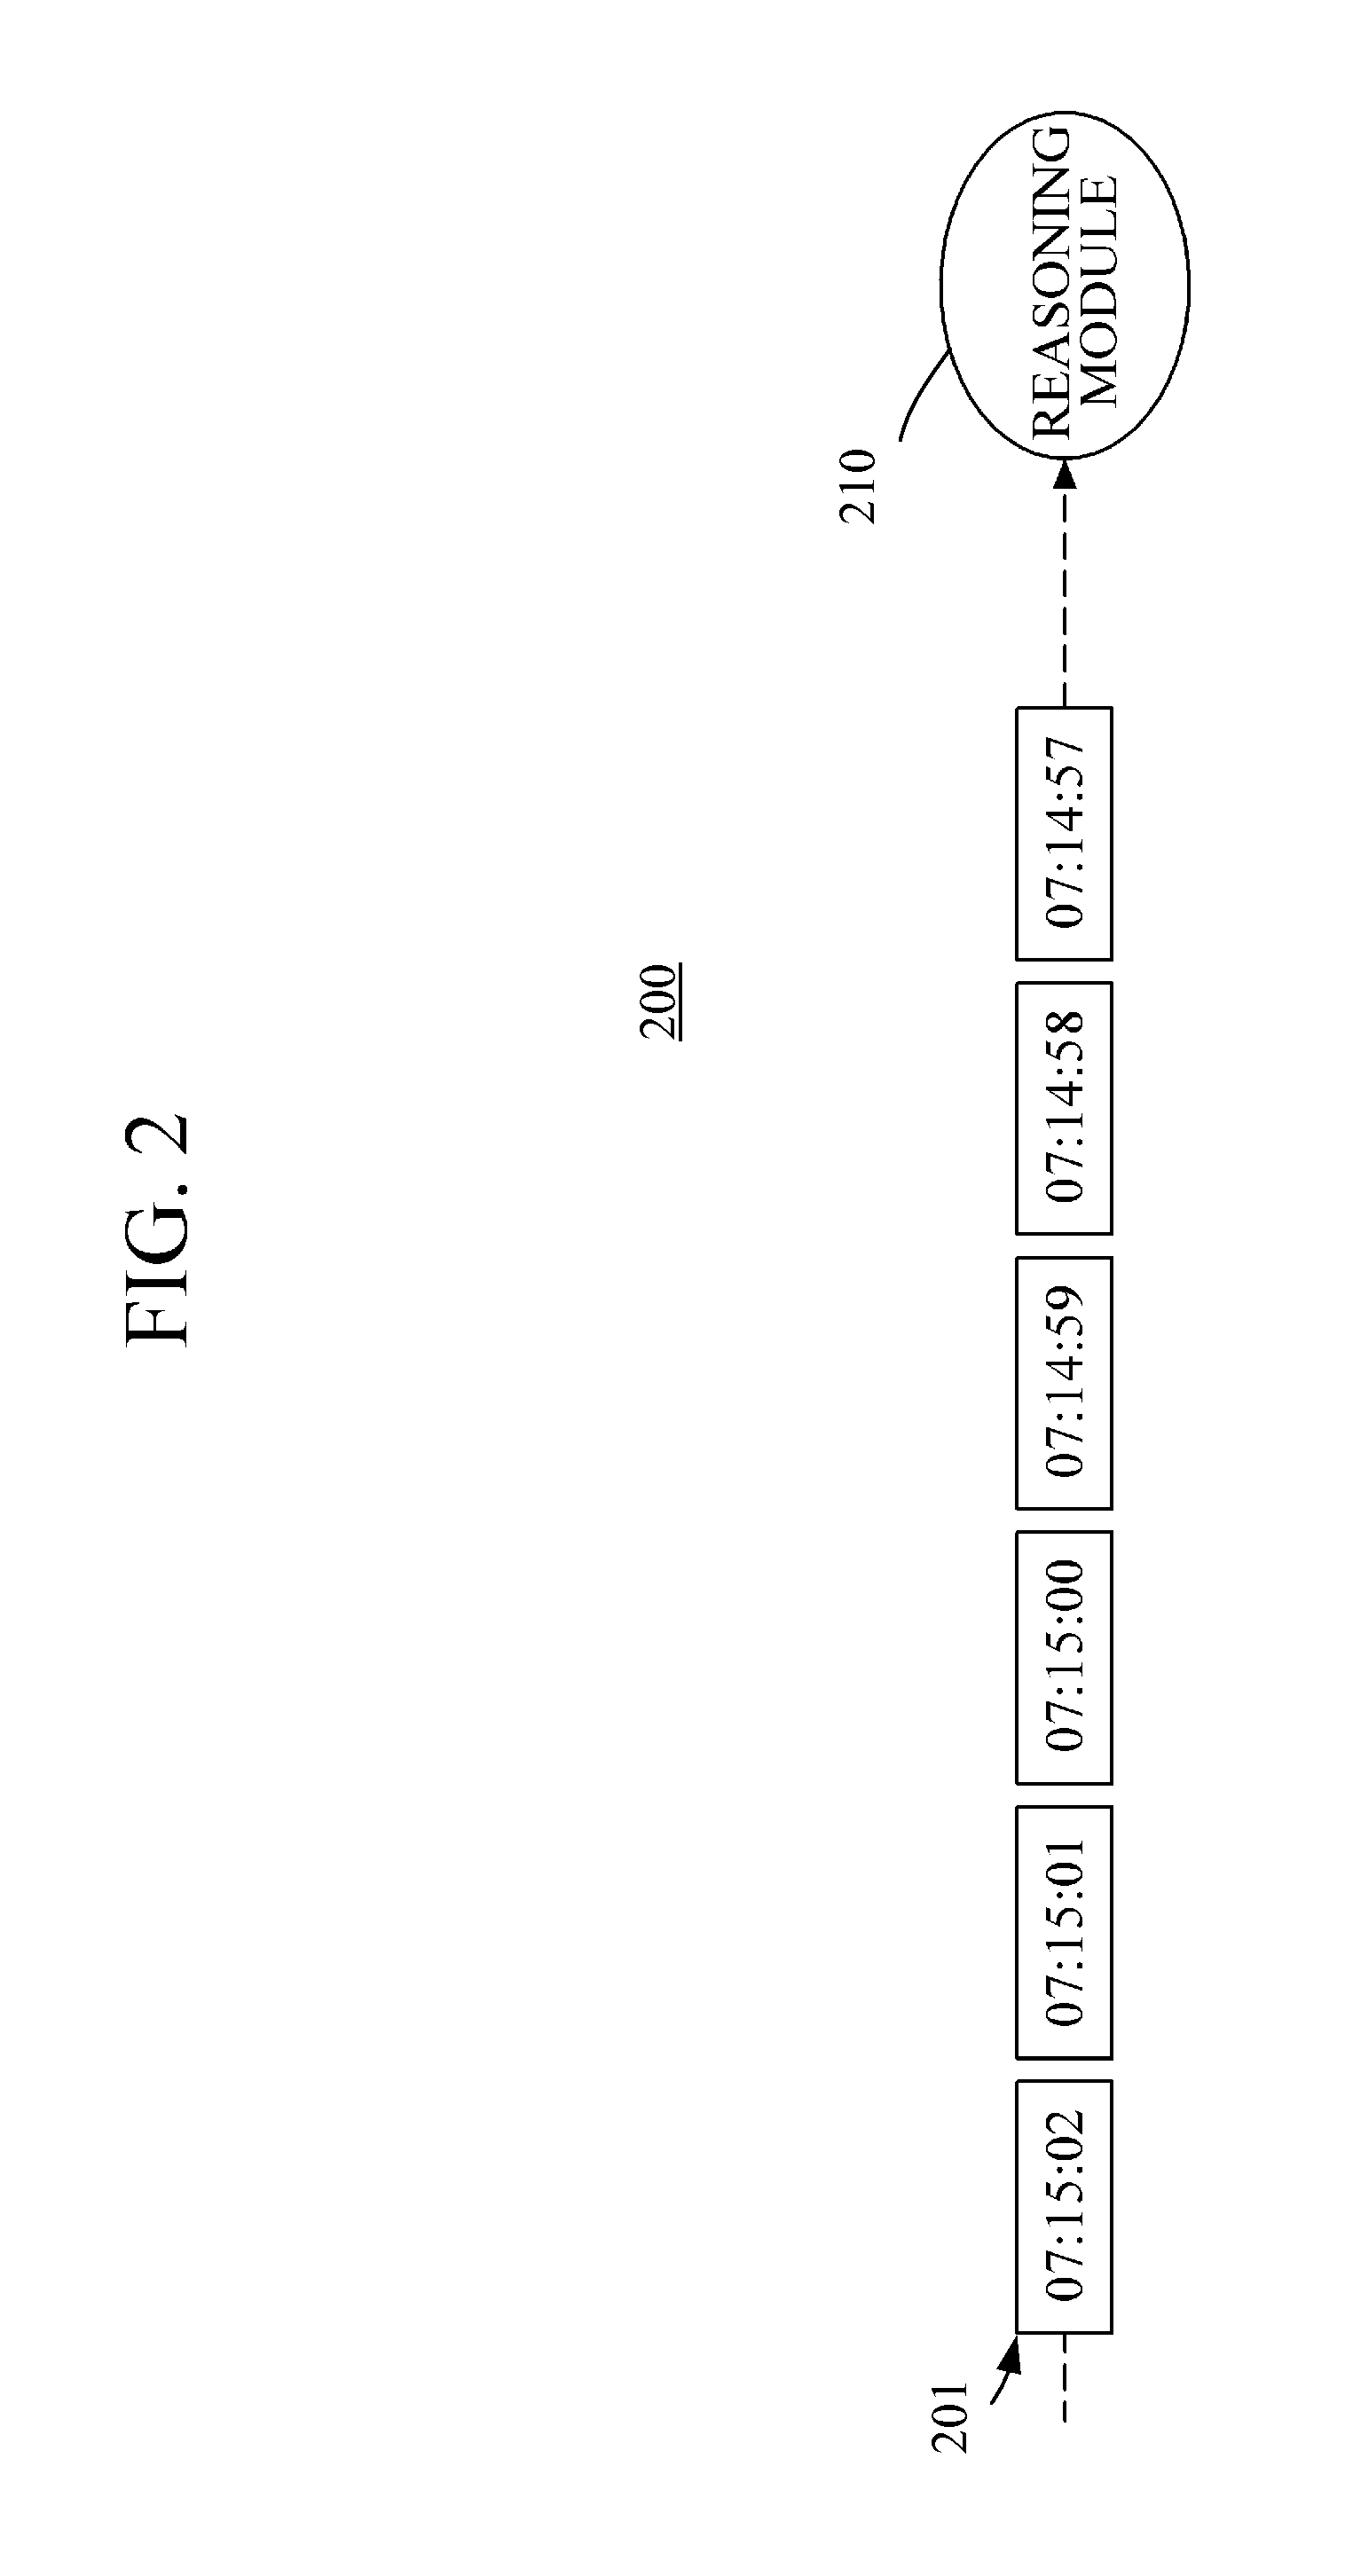 Context-aware apparatus and method for improving reasoning efficiency thereof